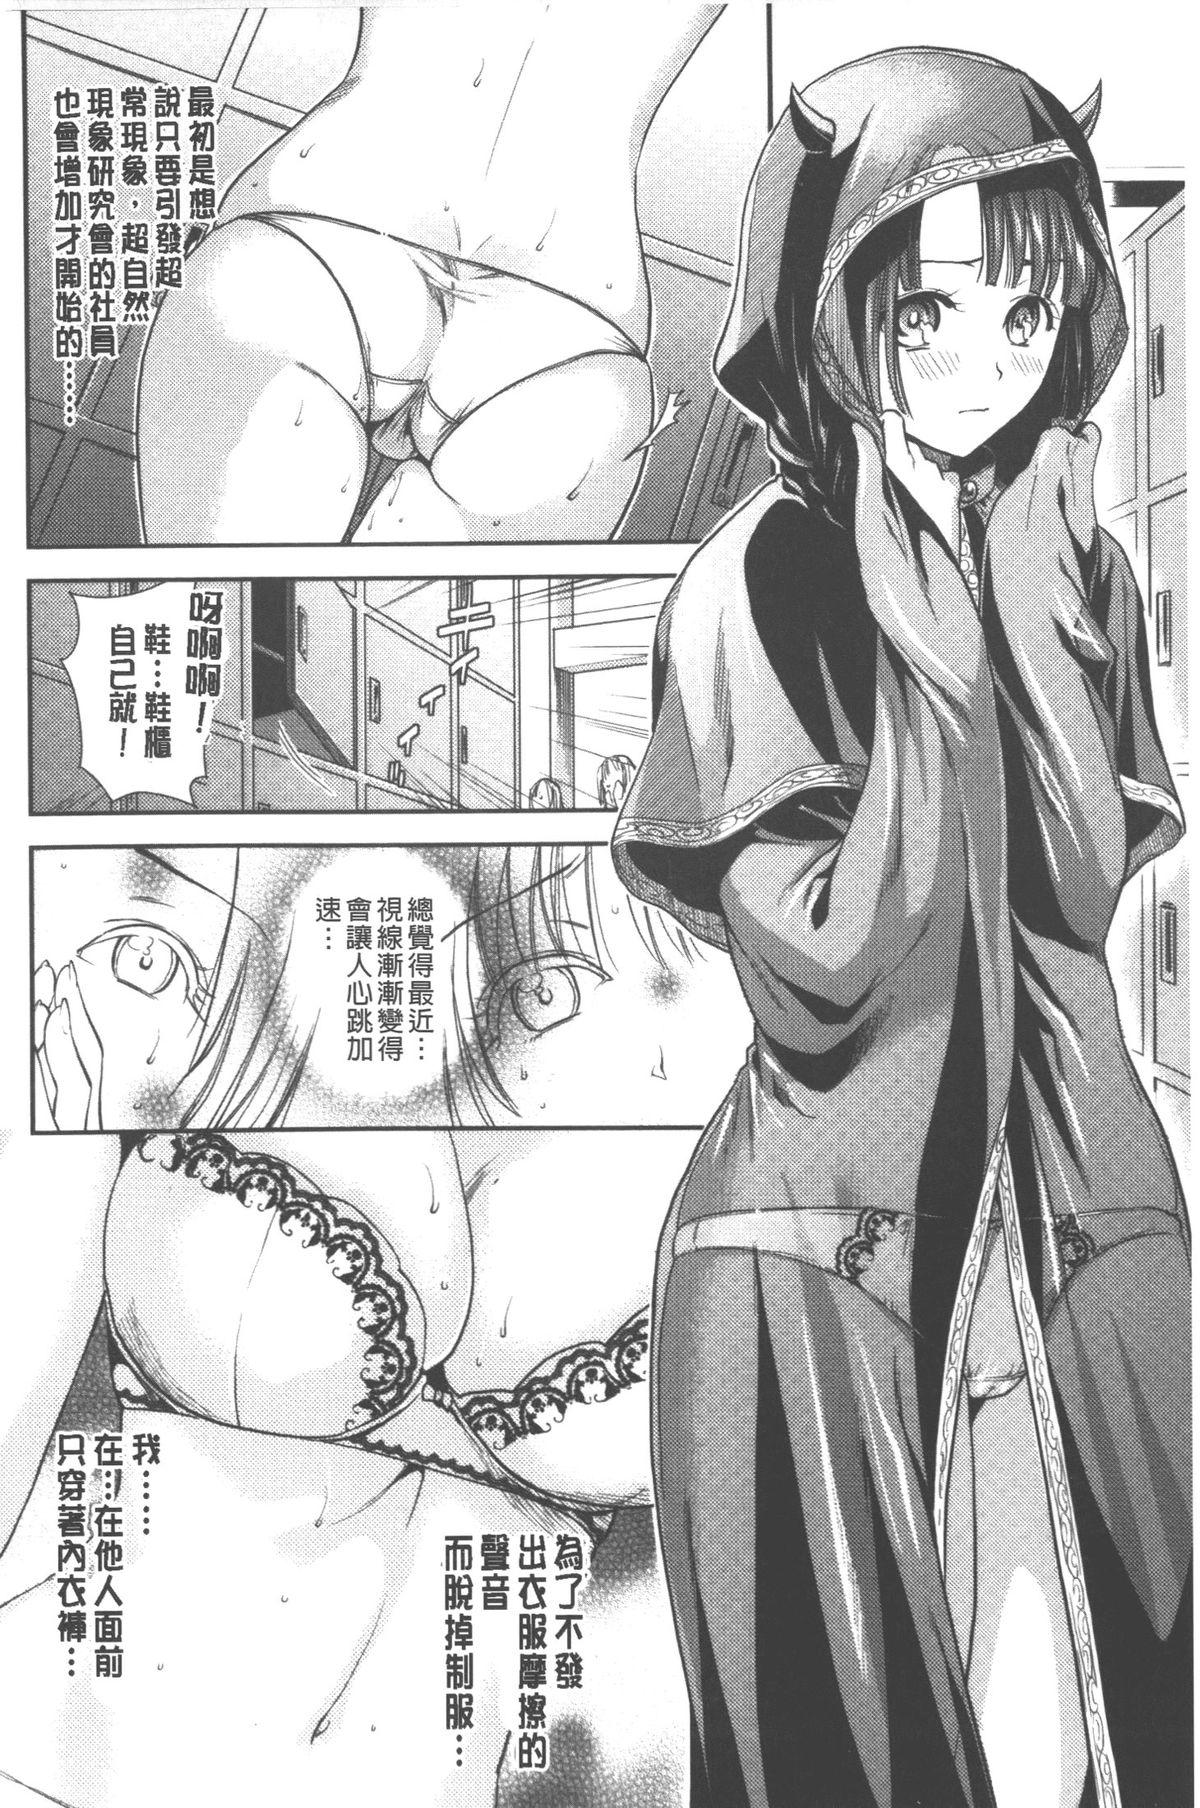 Striptease Hatsujou no Genri - The Principle of Sexual Excitement New - Page 7